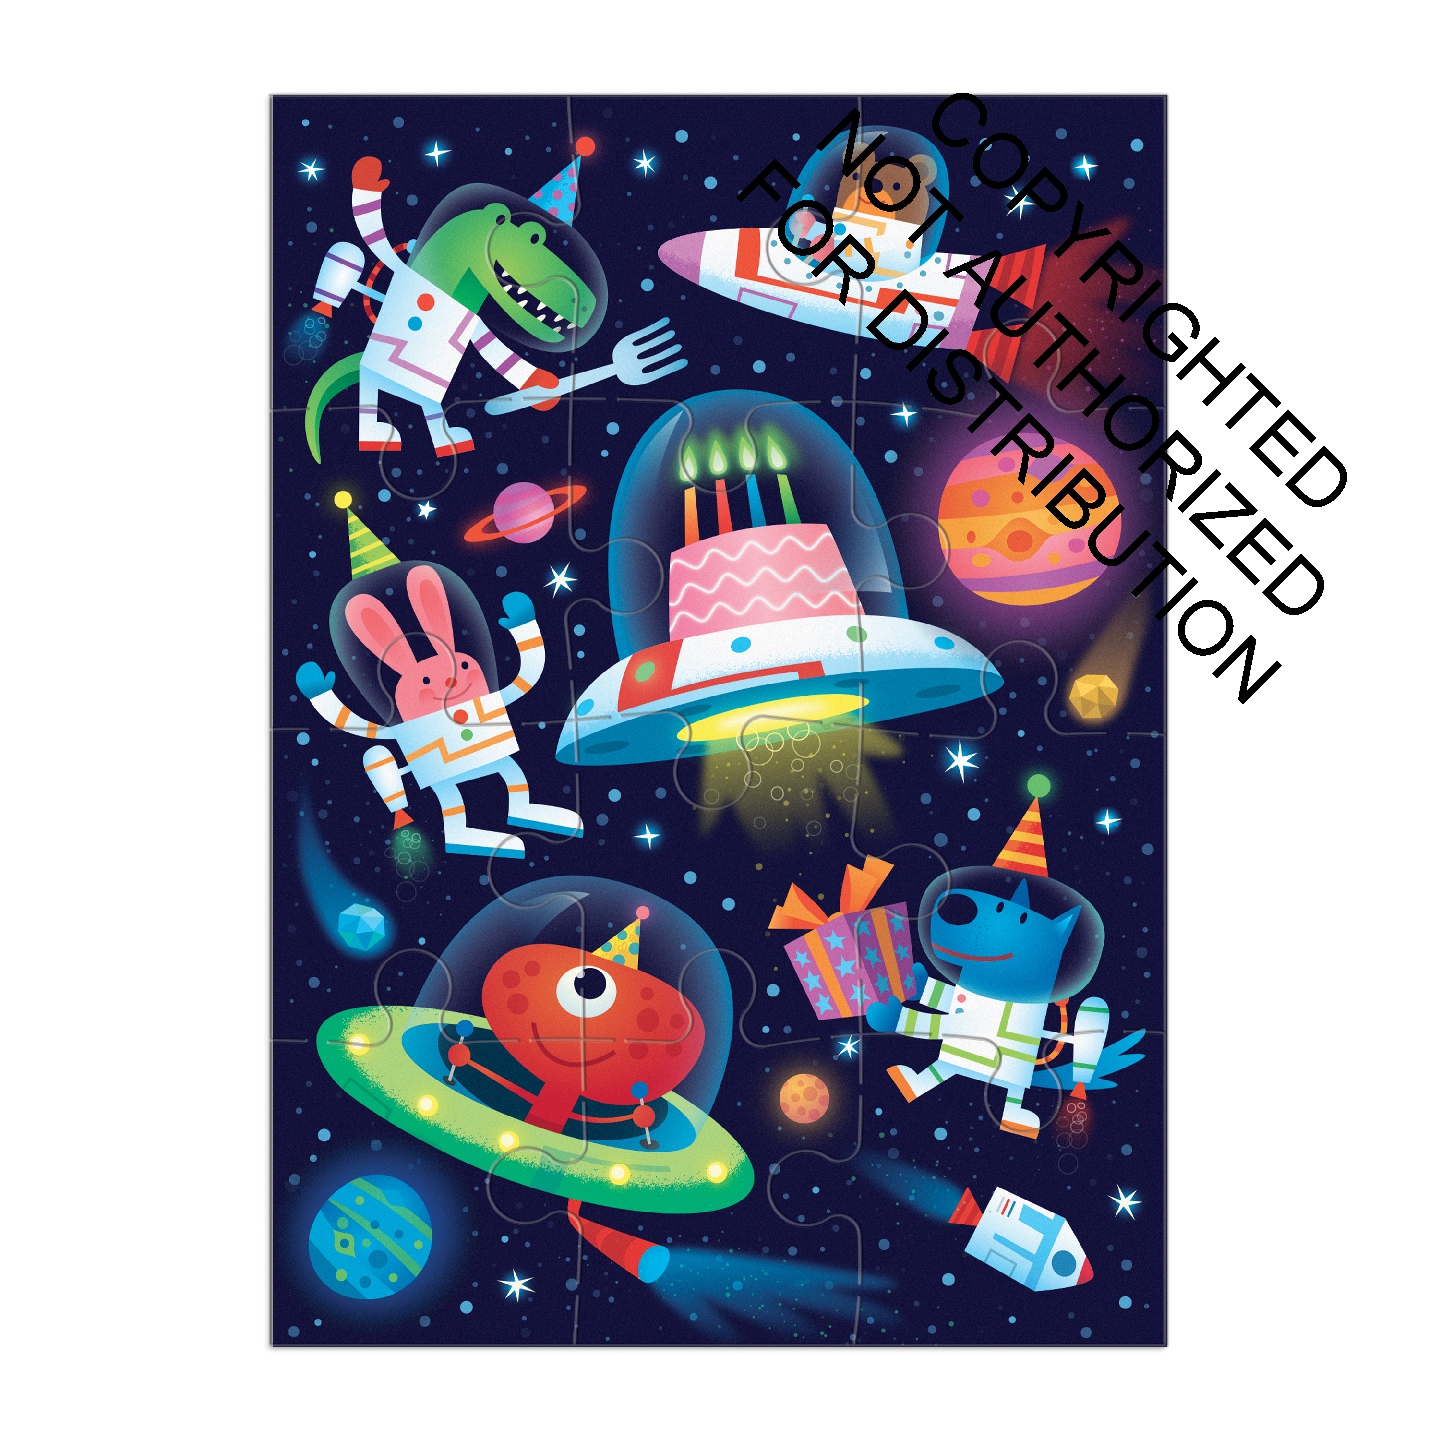 Cosmic Party Greeting Card Puzzle